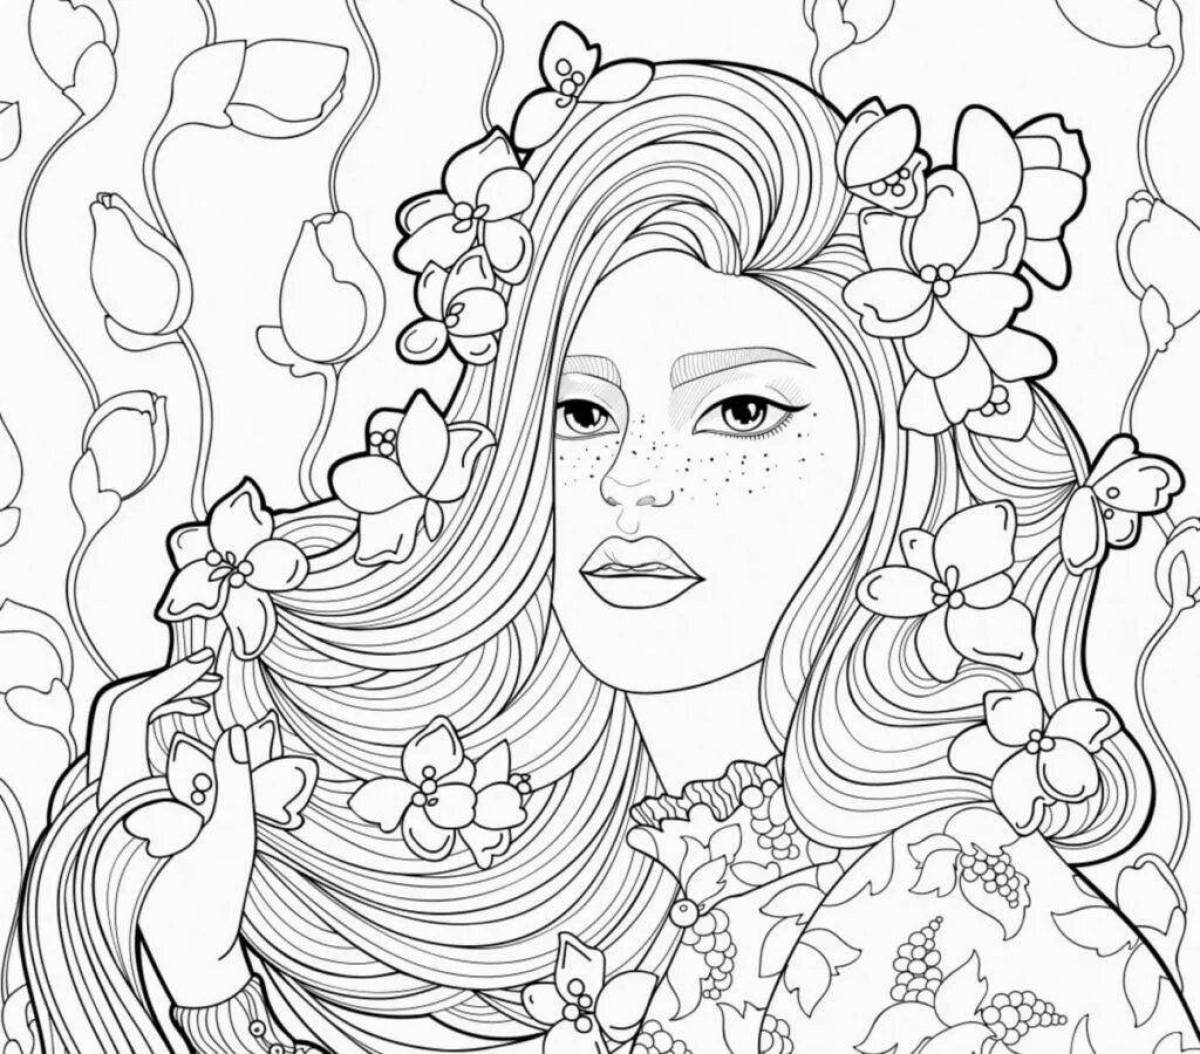 Stimulating anti-stress coloring book for girls 13 years old